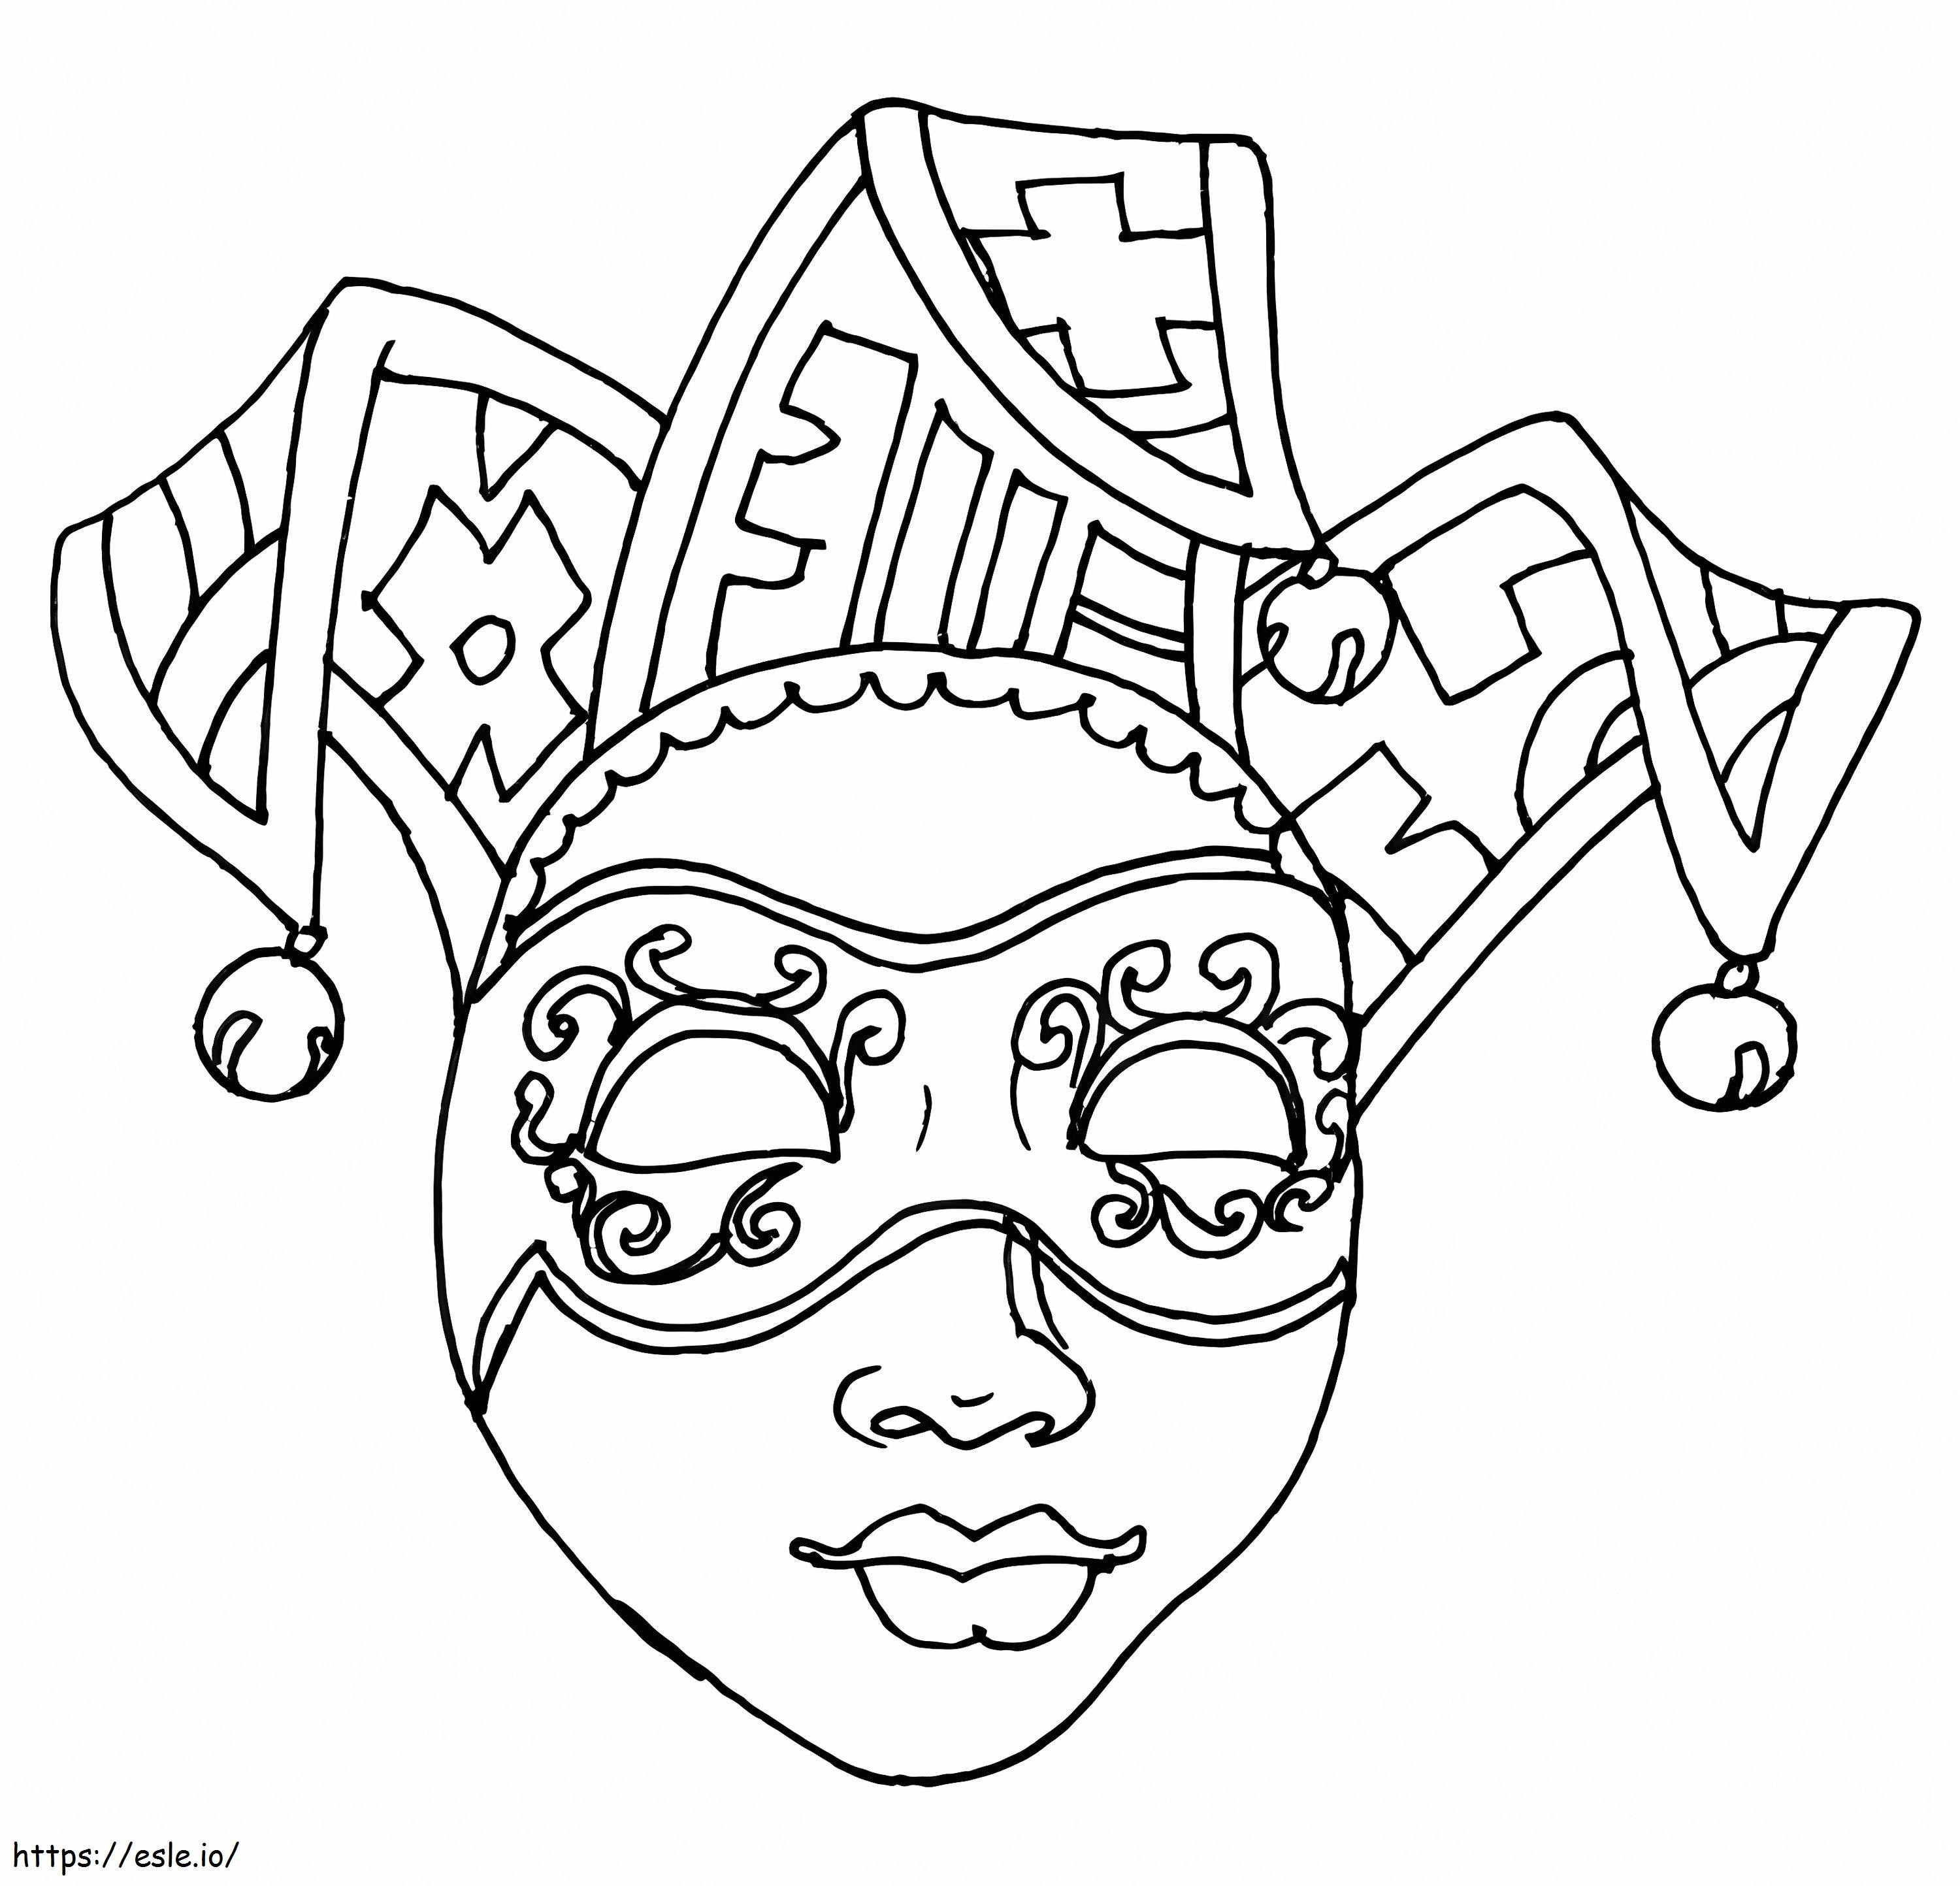 Carnival 5 coloring page